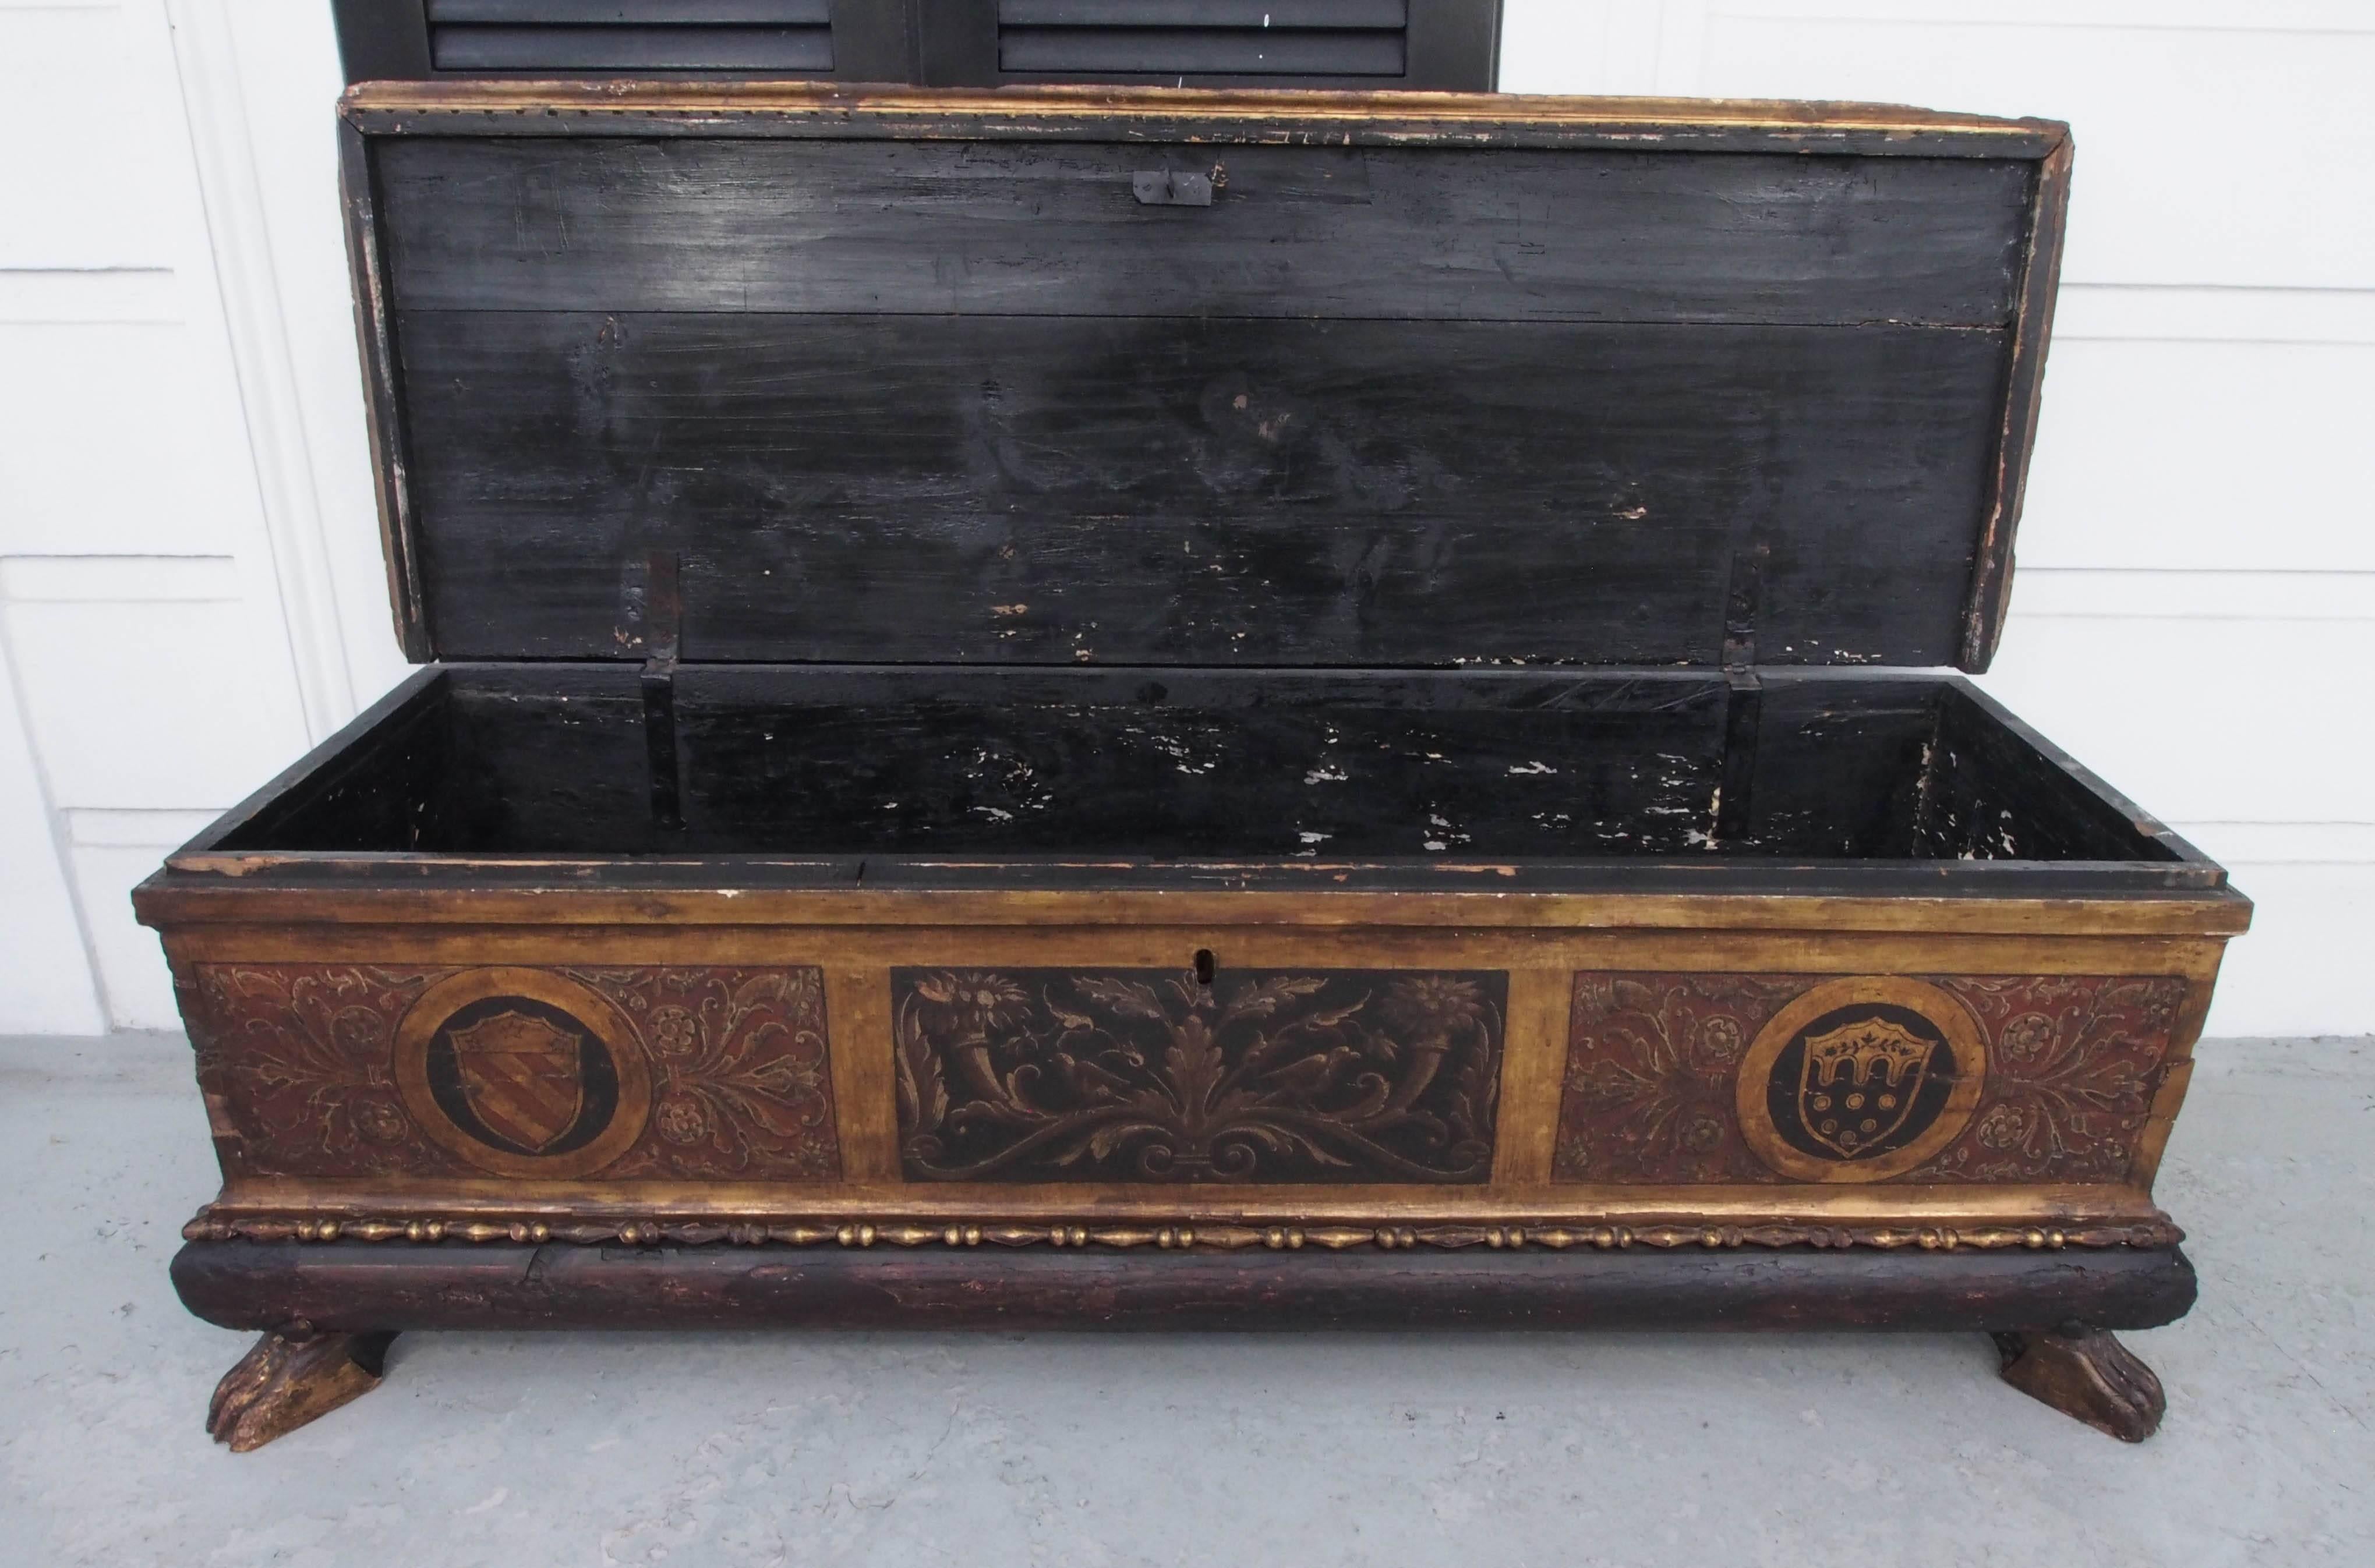 18th century Italian painted wood cassone with paw feet.